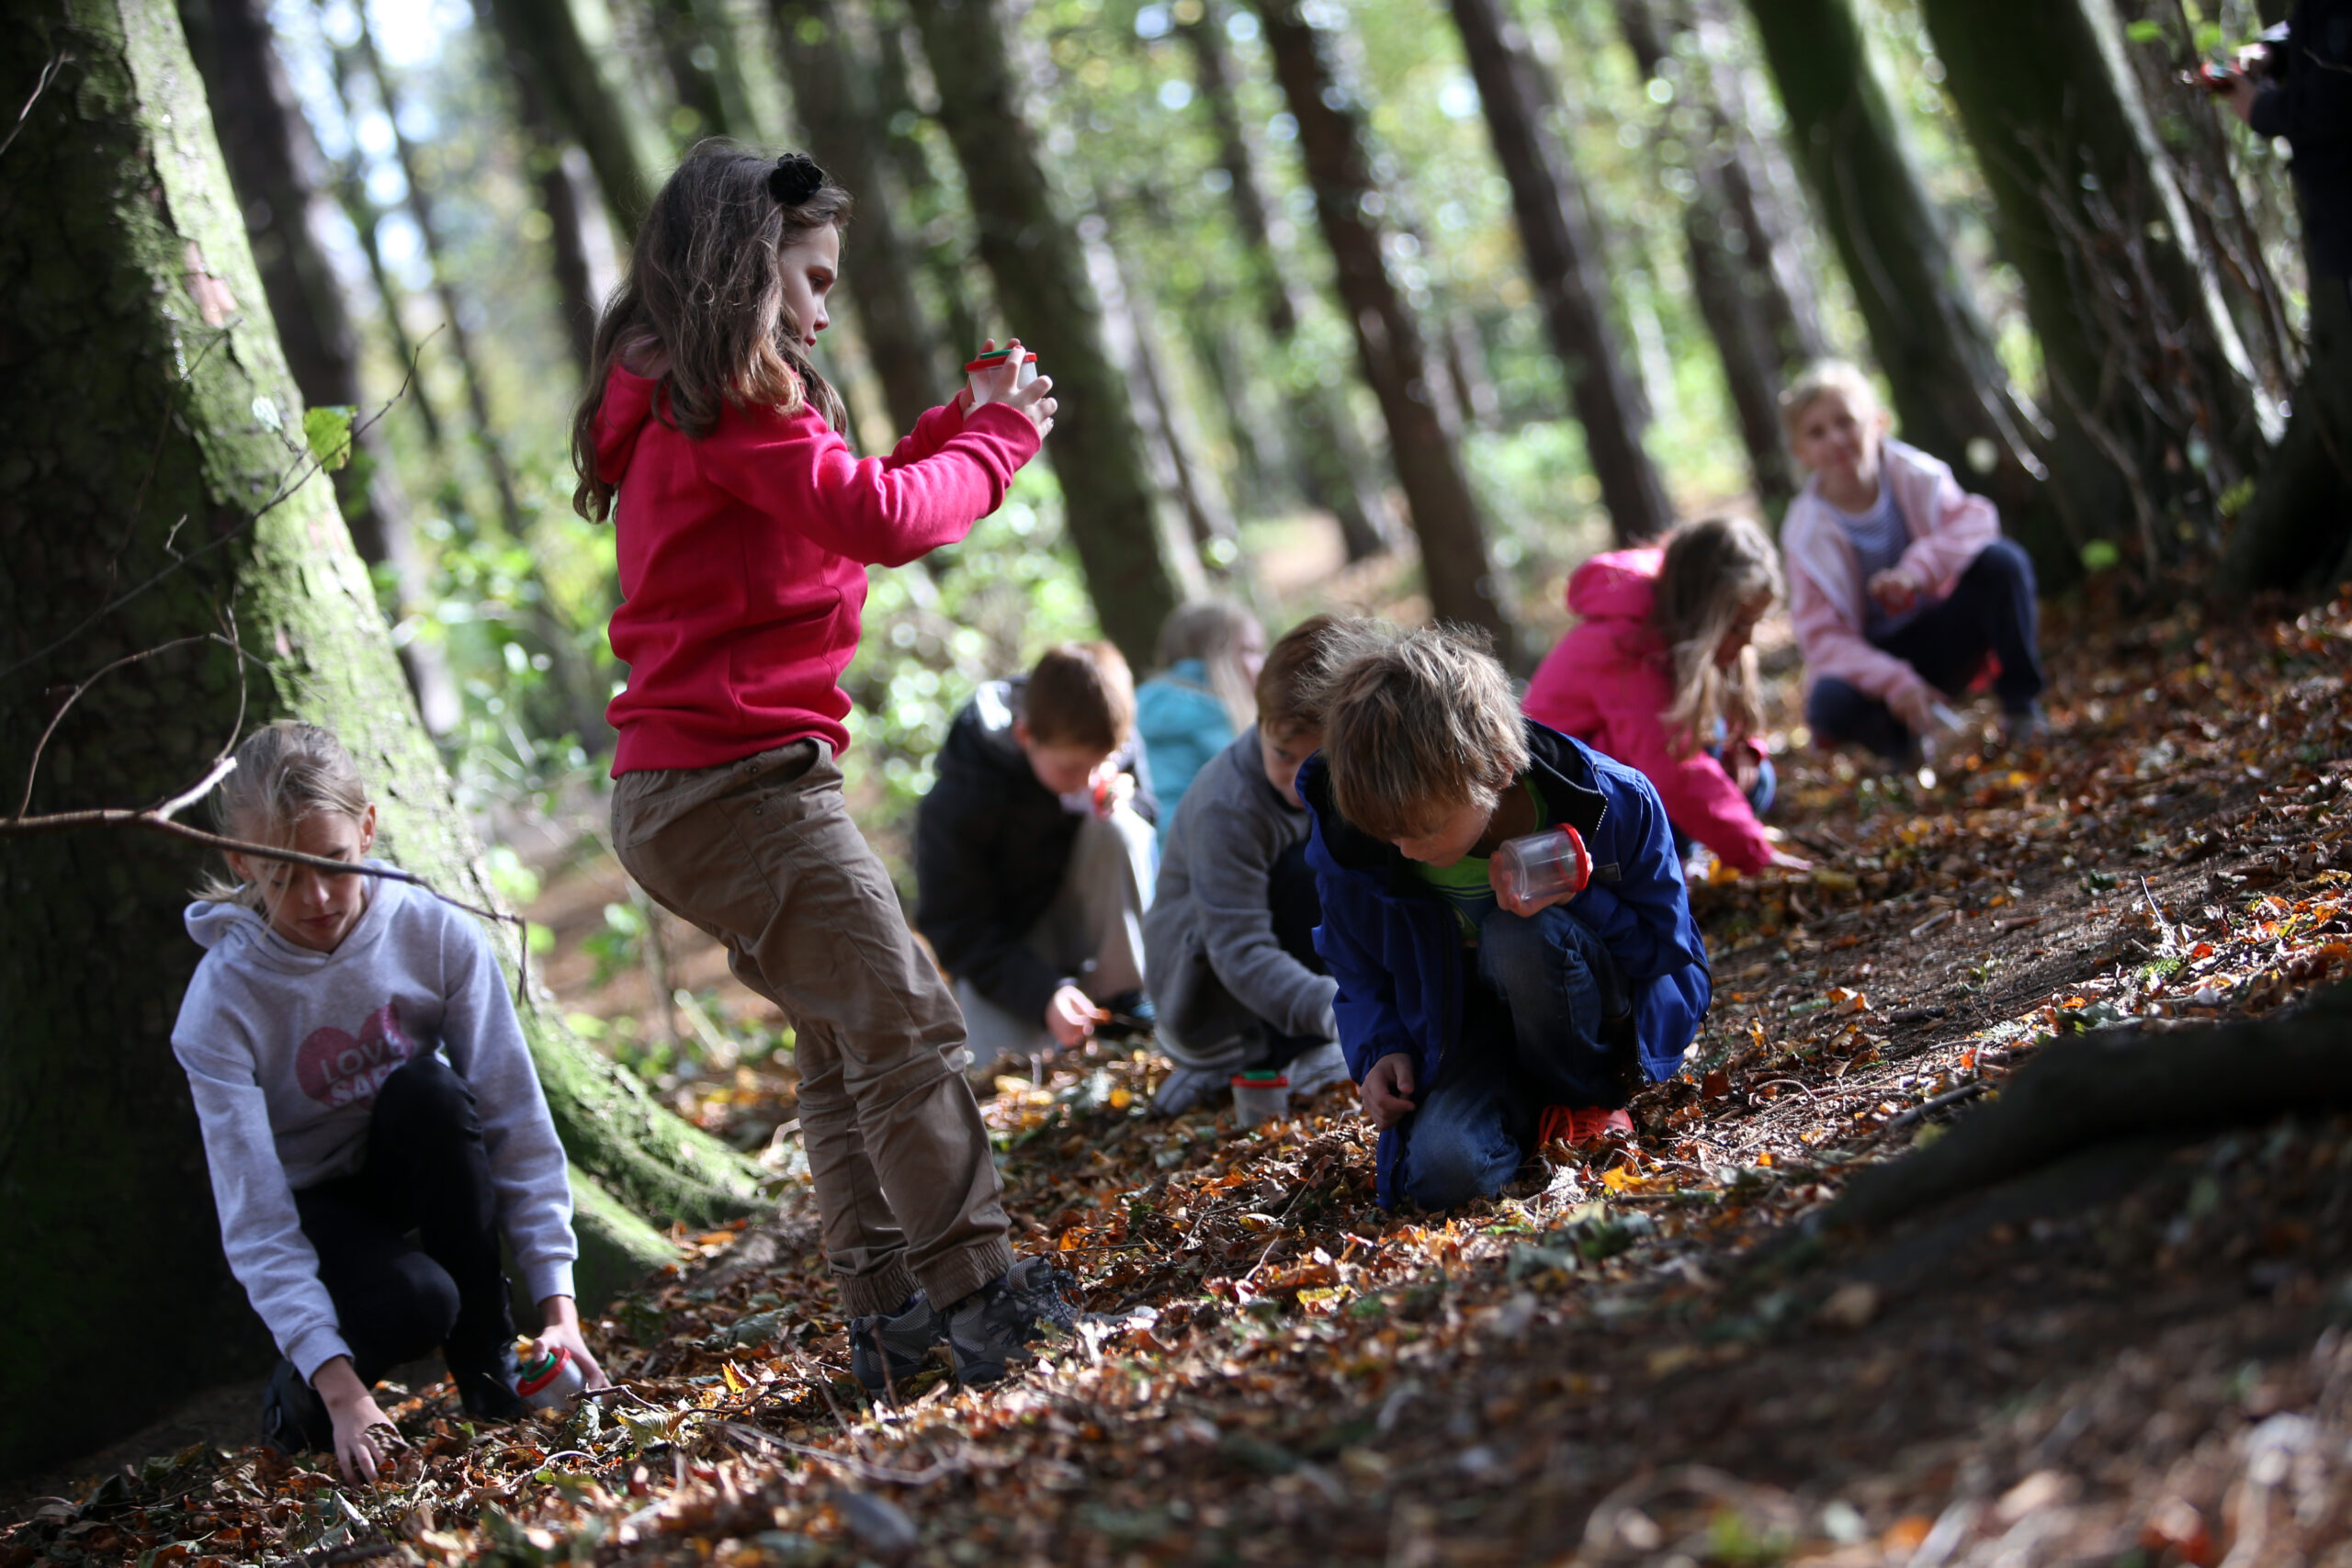 Children playing and learning in wooded area